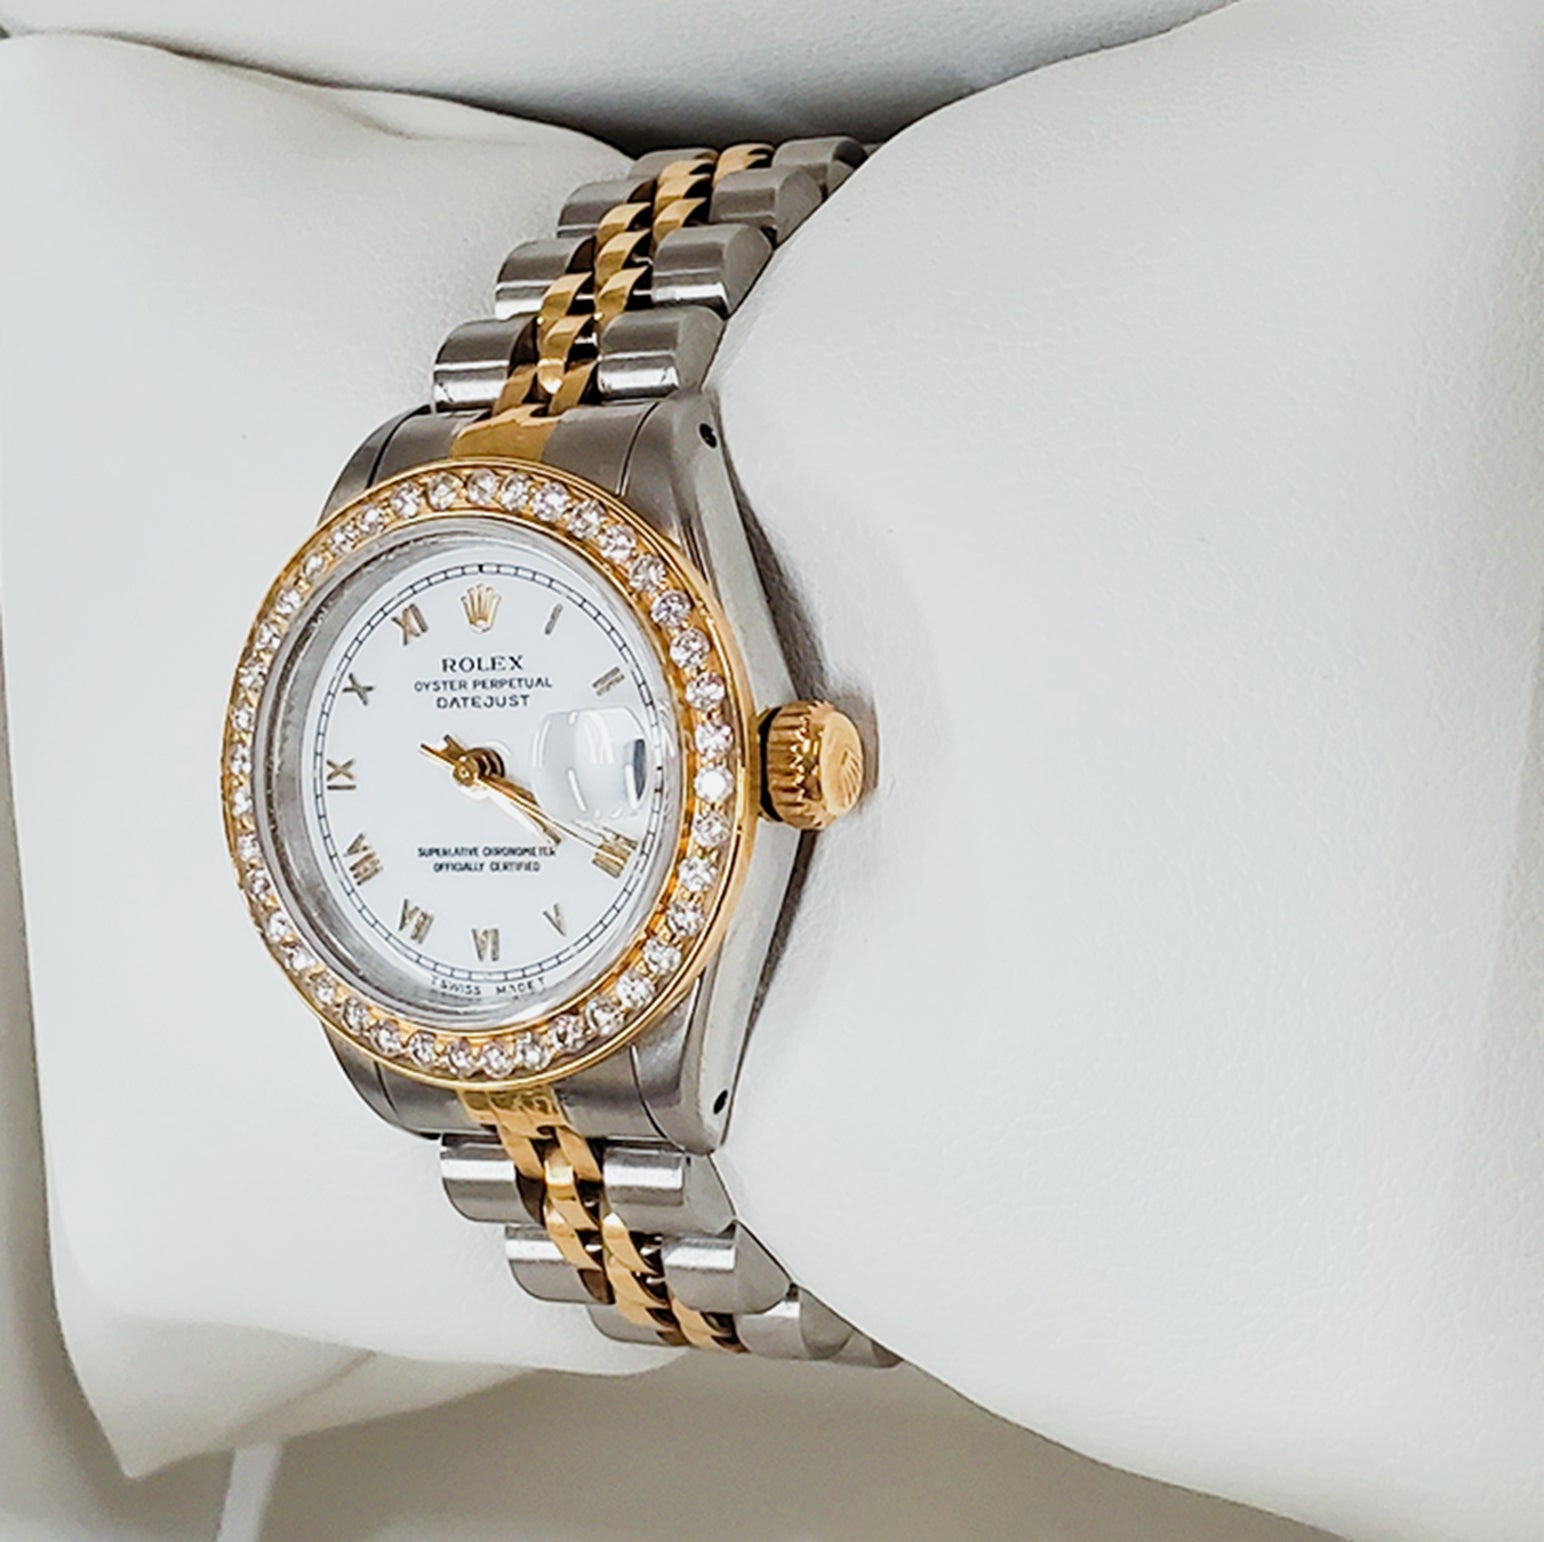 Women's Rolex 18K Gold Two-Tone 26mm DateJust Watch with Roman Numerals, White Dial and Diamond Bezel. (Pre-Owned)